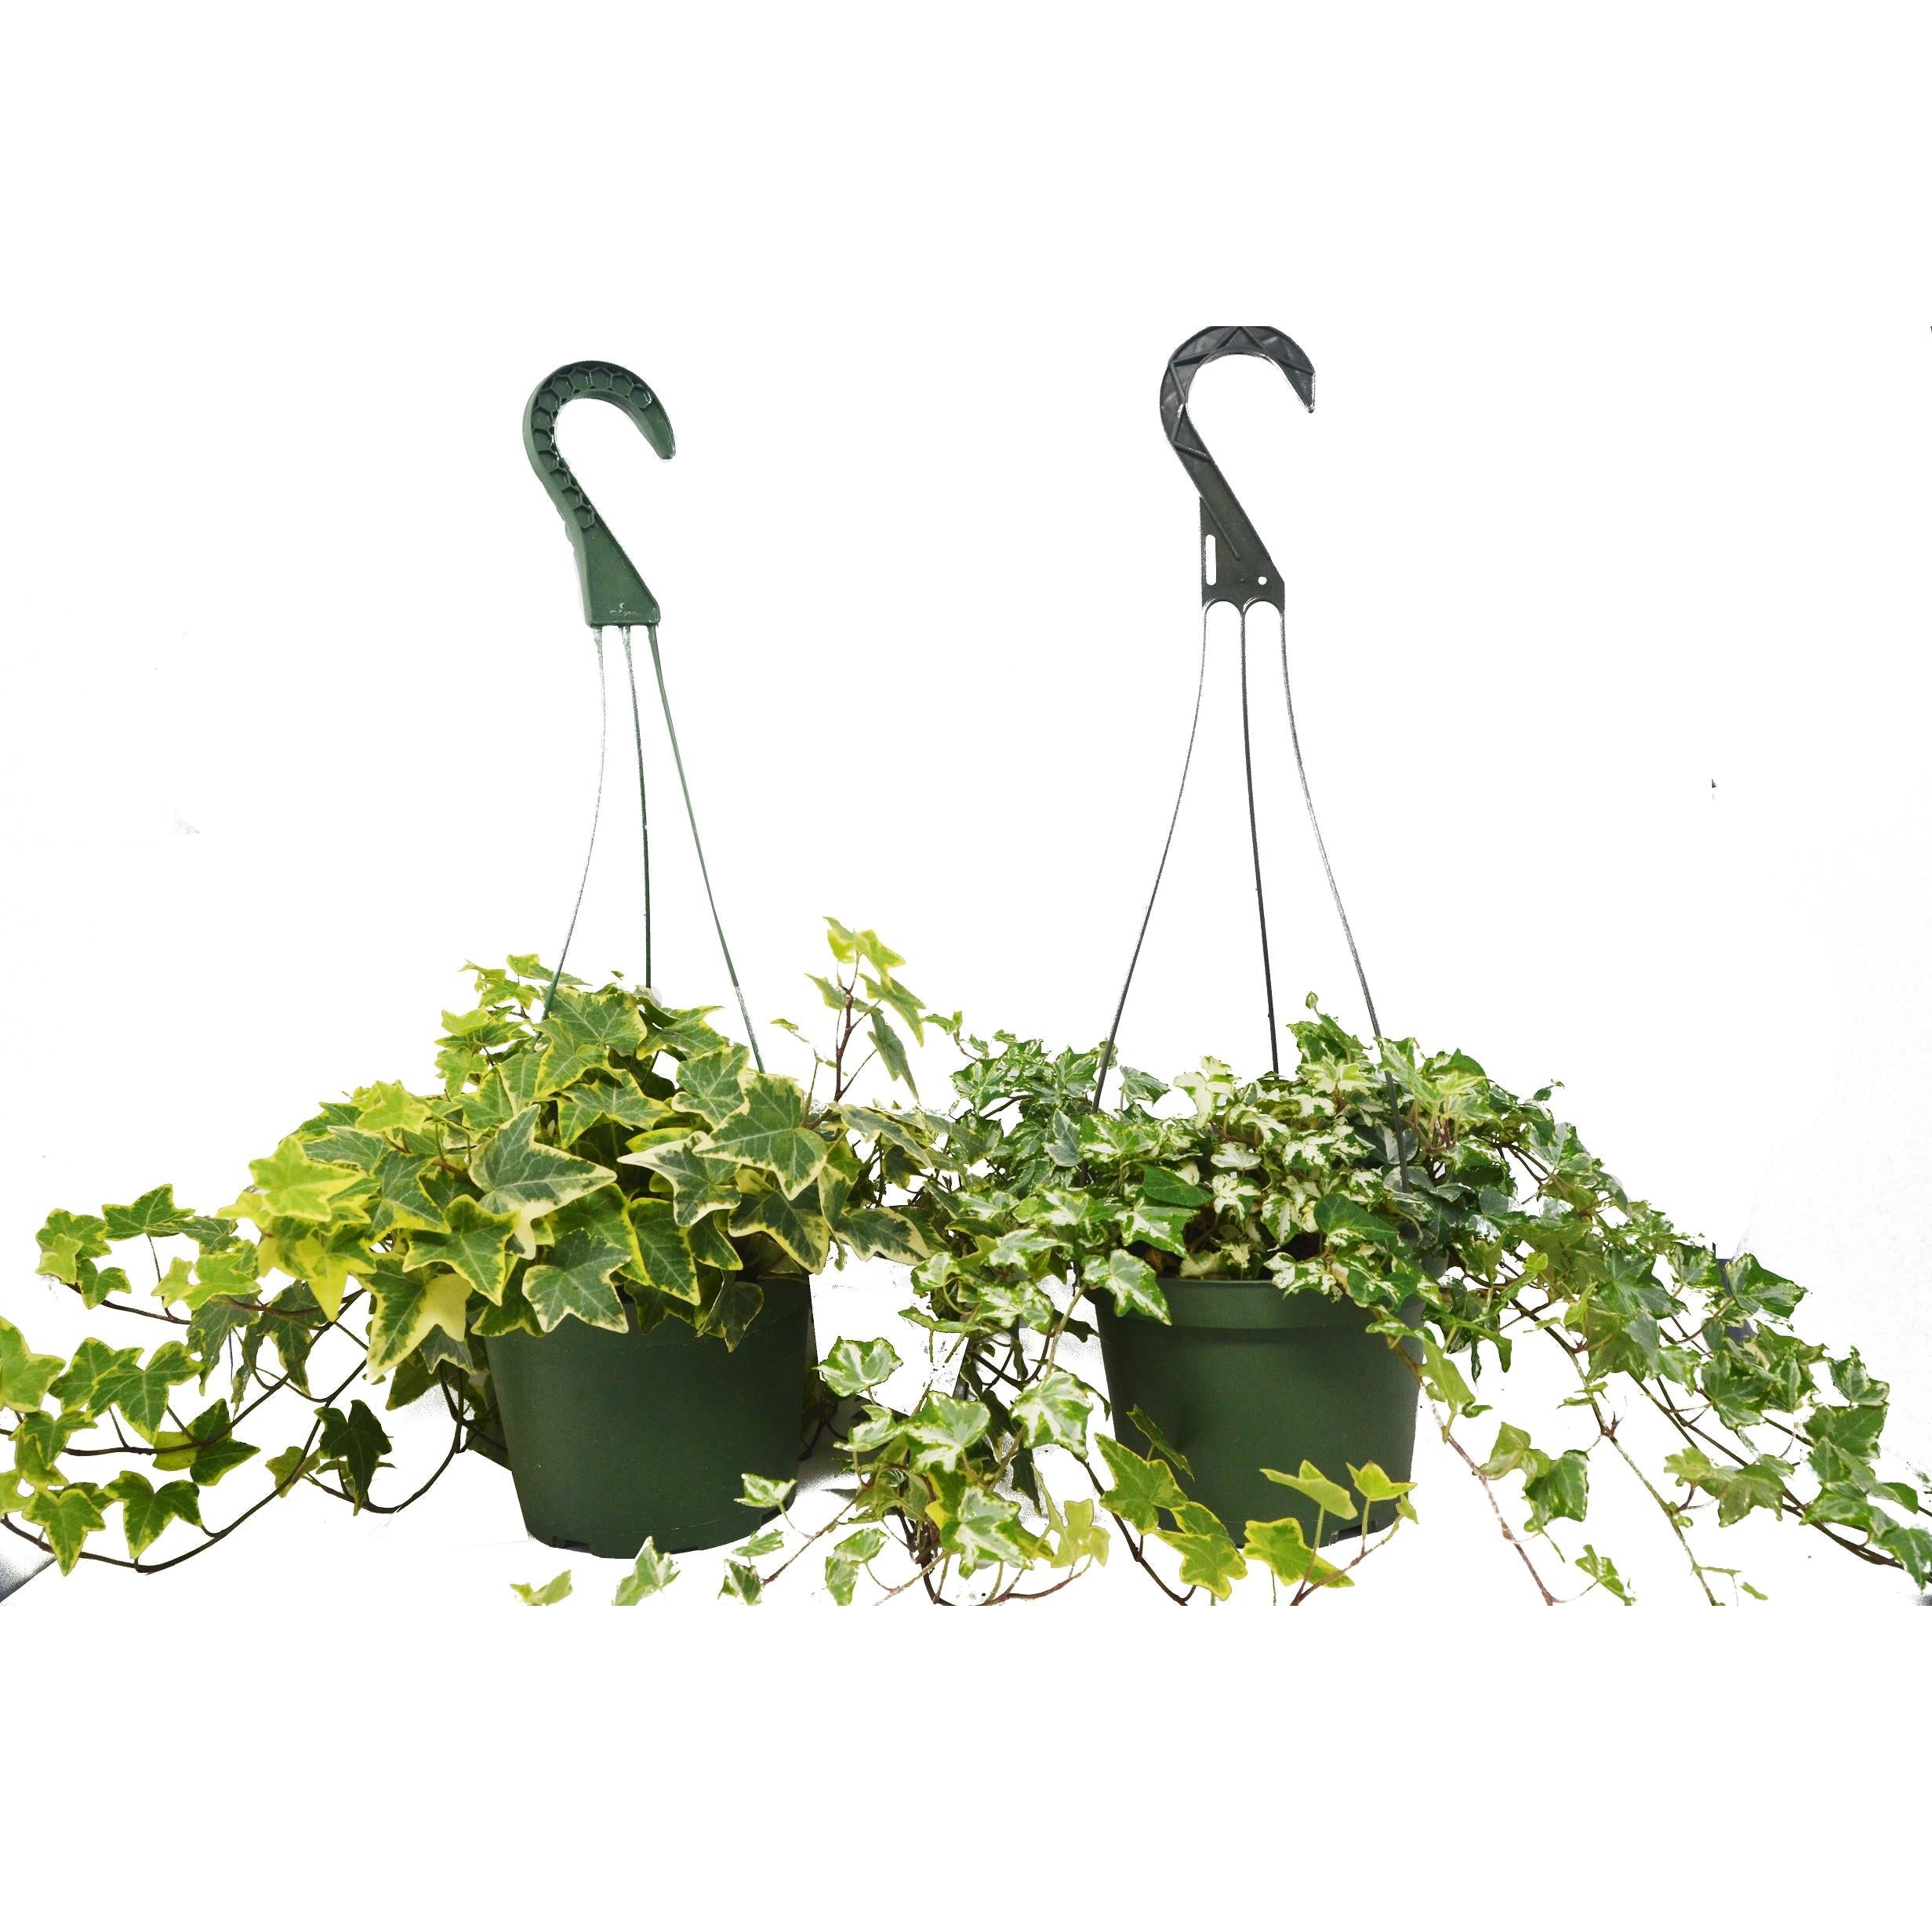 2 English Ivy Variety Pack - FREE Care Guide - 6" Hanging Pot